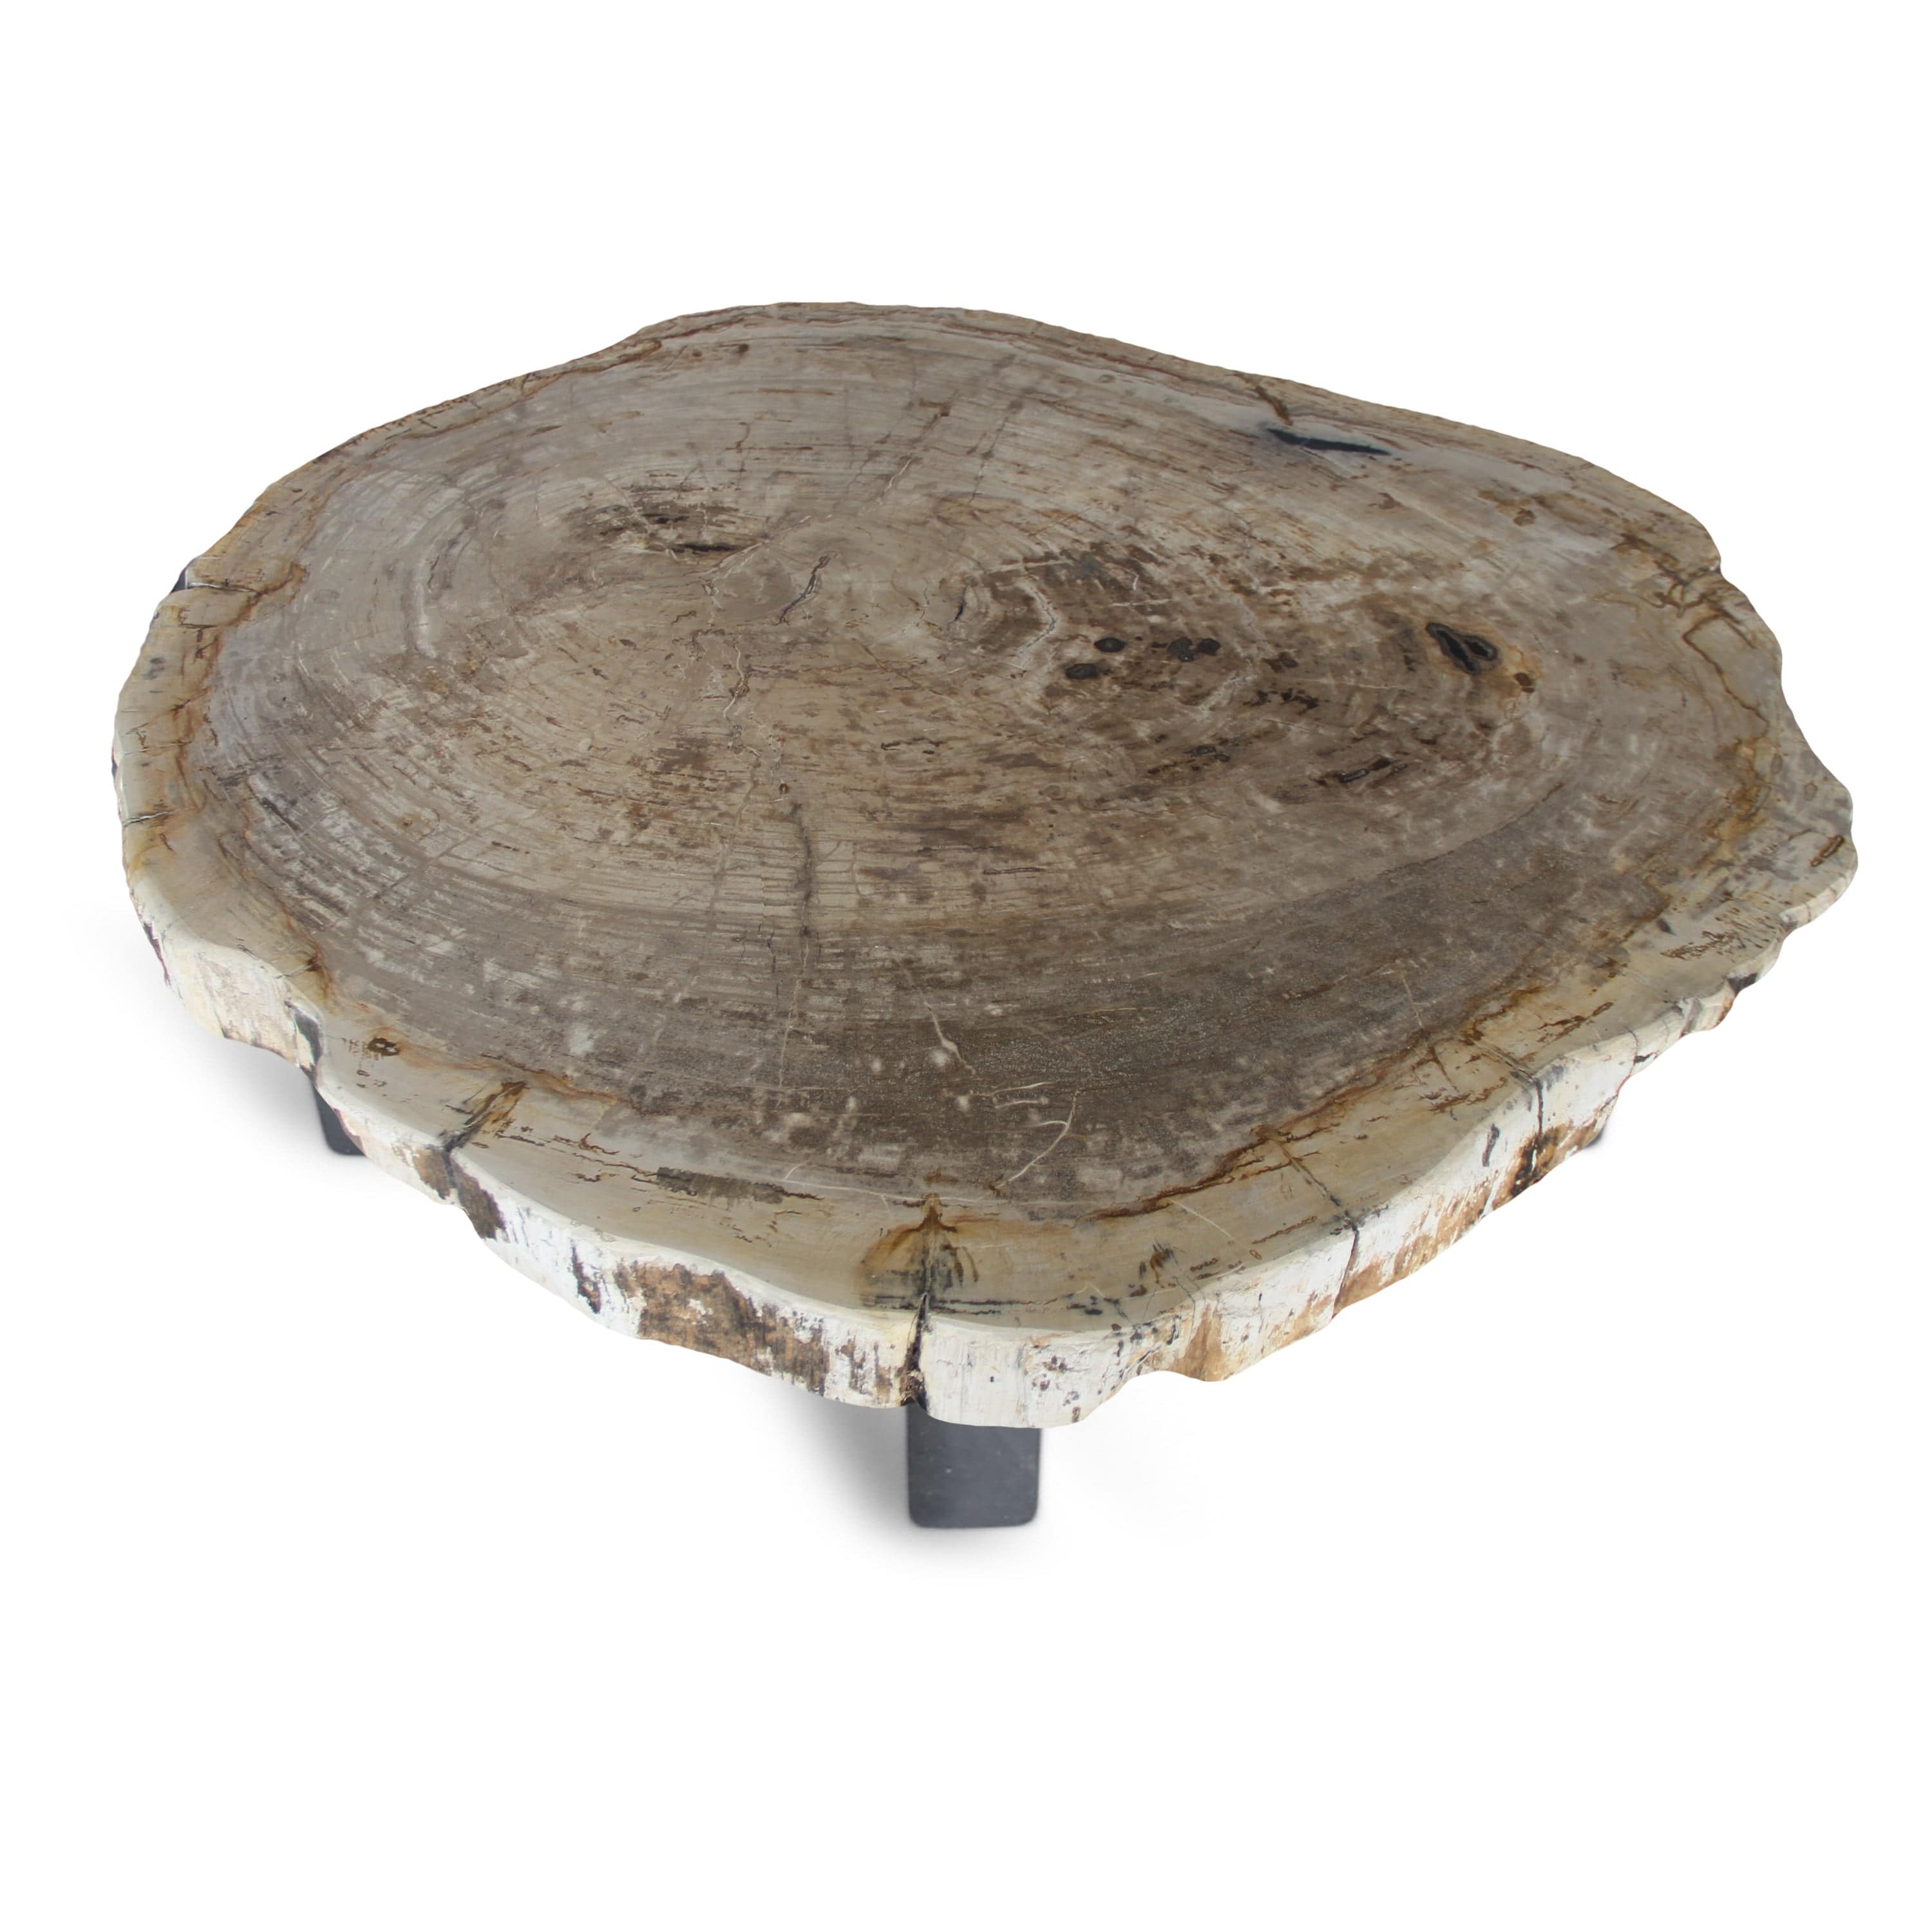 Kalifano Petrified Wood Petrified Wood Round Slab Coffee Table from Indonesia - 34" / 158 lbs PWT5800.001